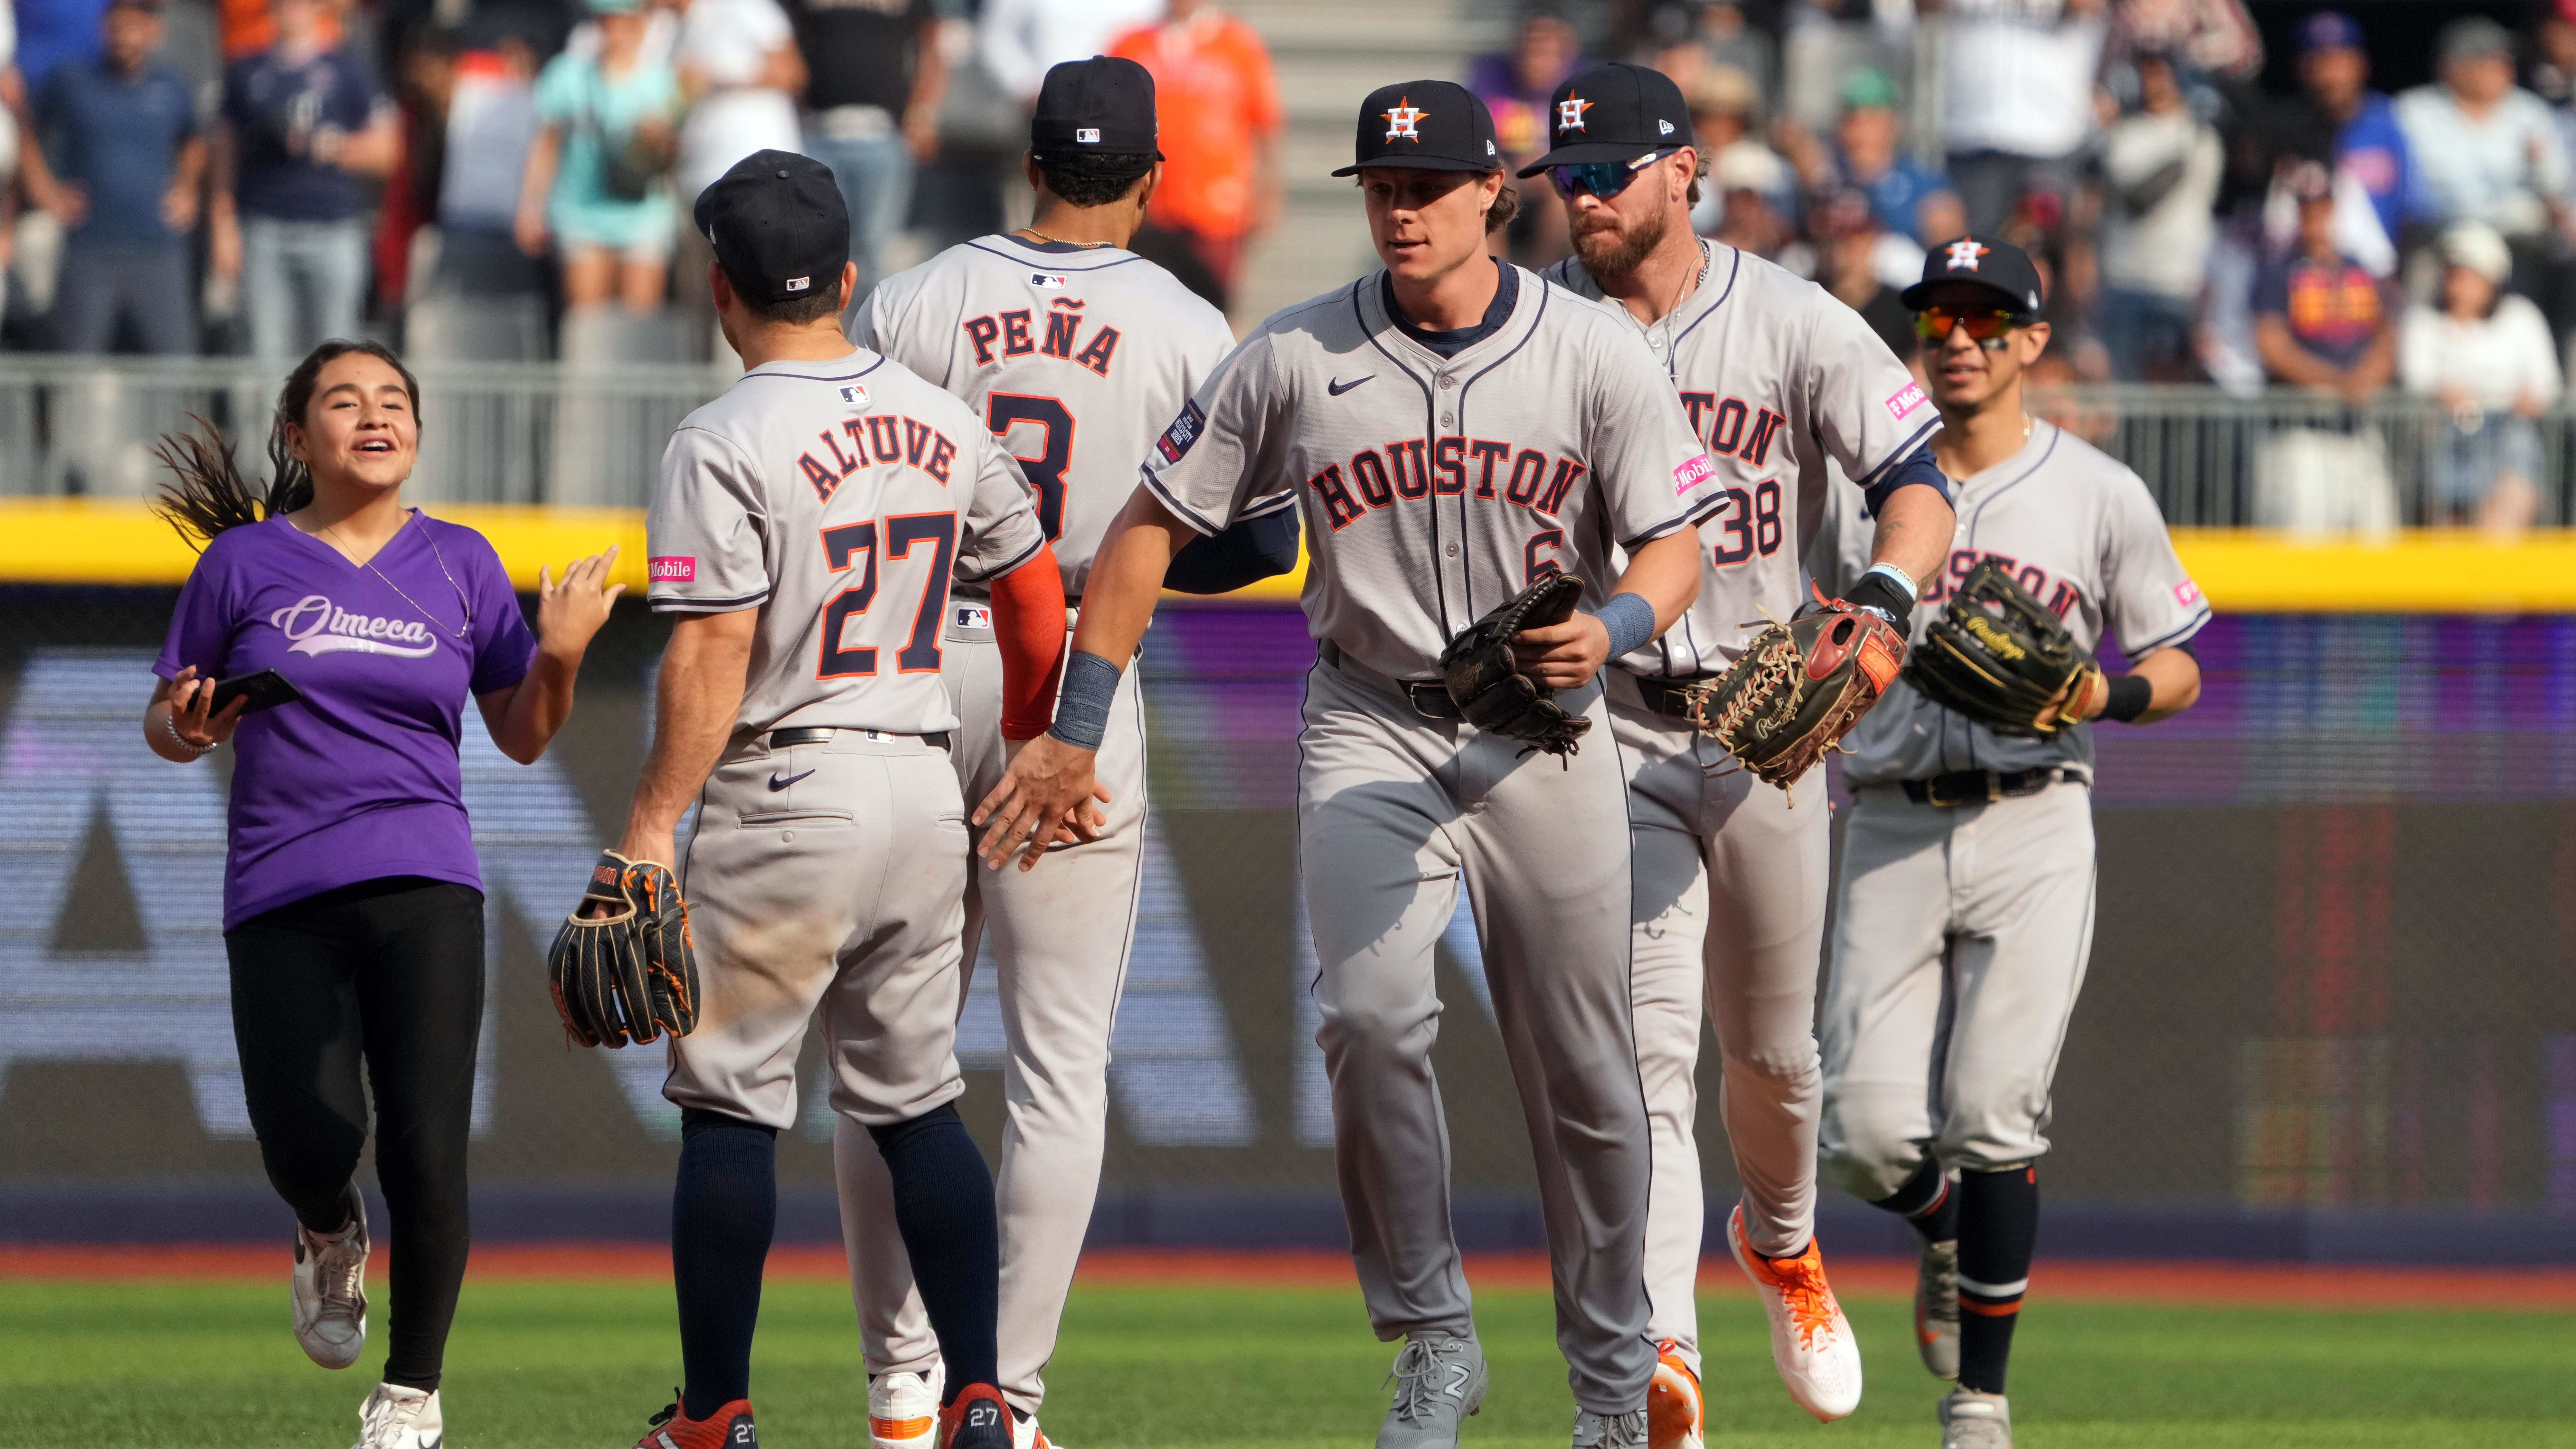 Could Dominant Mexico Series Be Turning Point For Houston Astros?